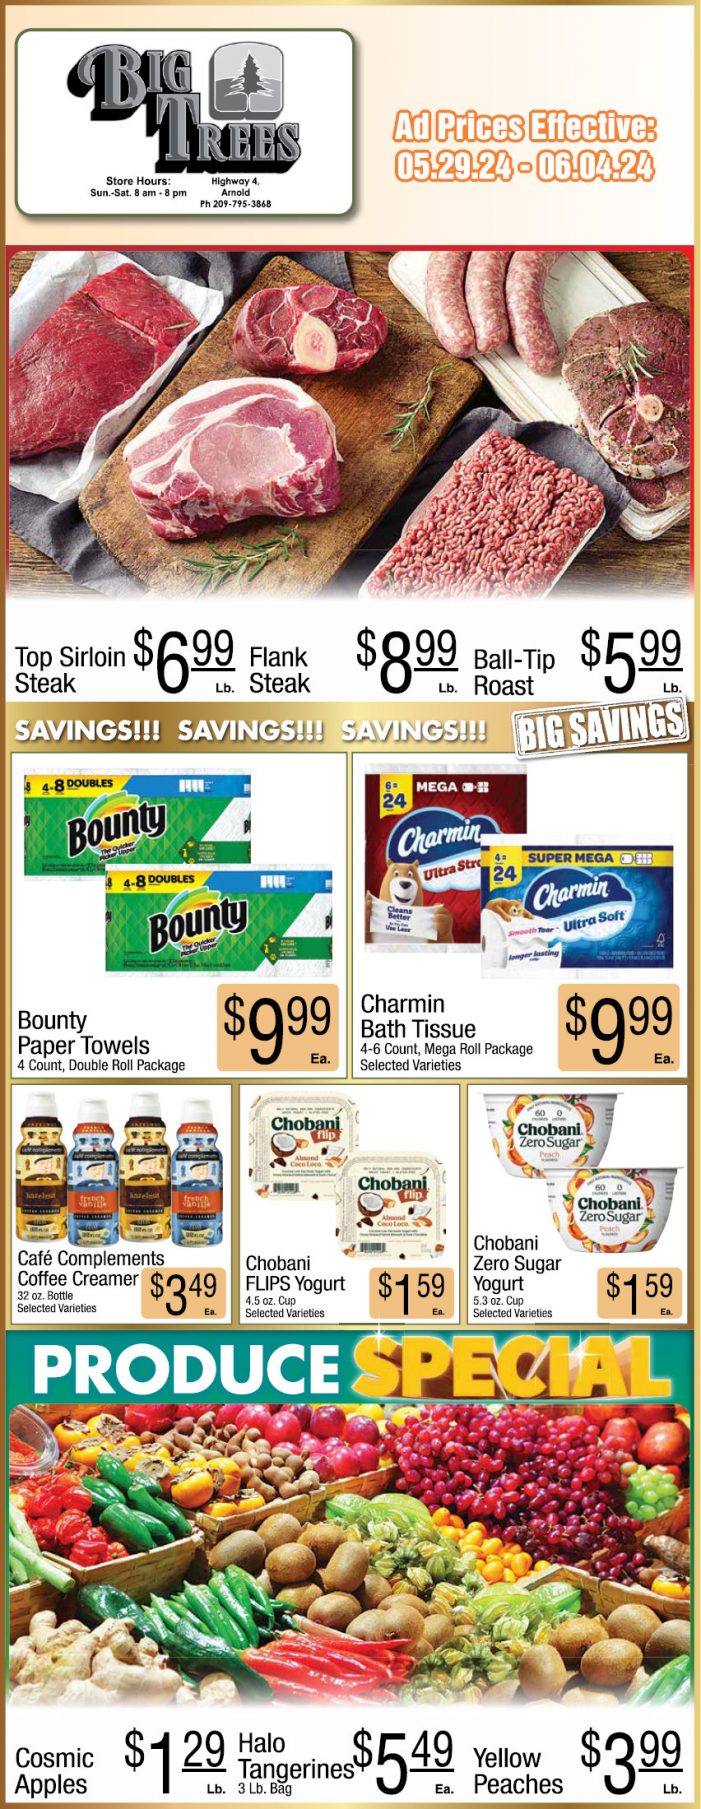 Big Trees Market Weekly Ad, Grocery, Produce, Meat & Deli Specials Through June 4th! Shop Local & Save!